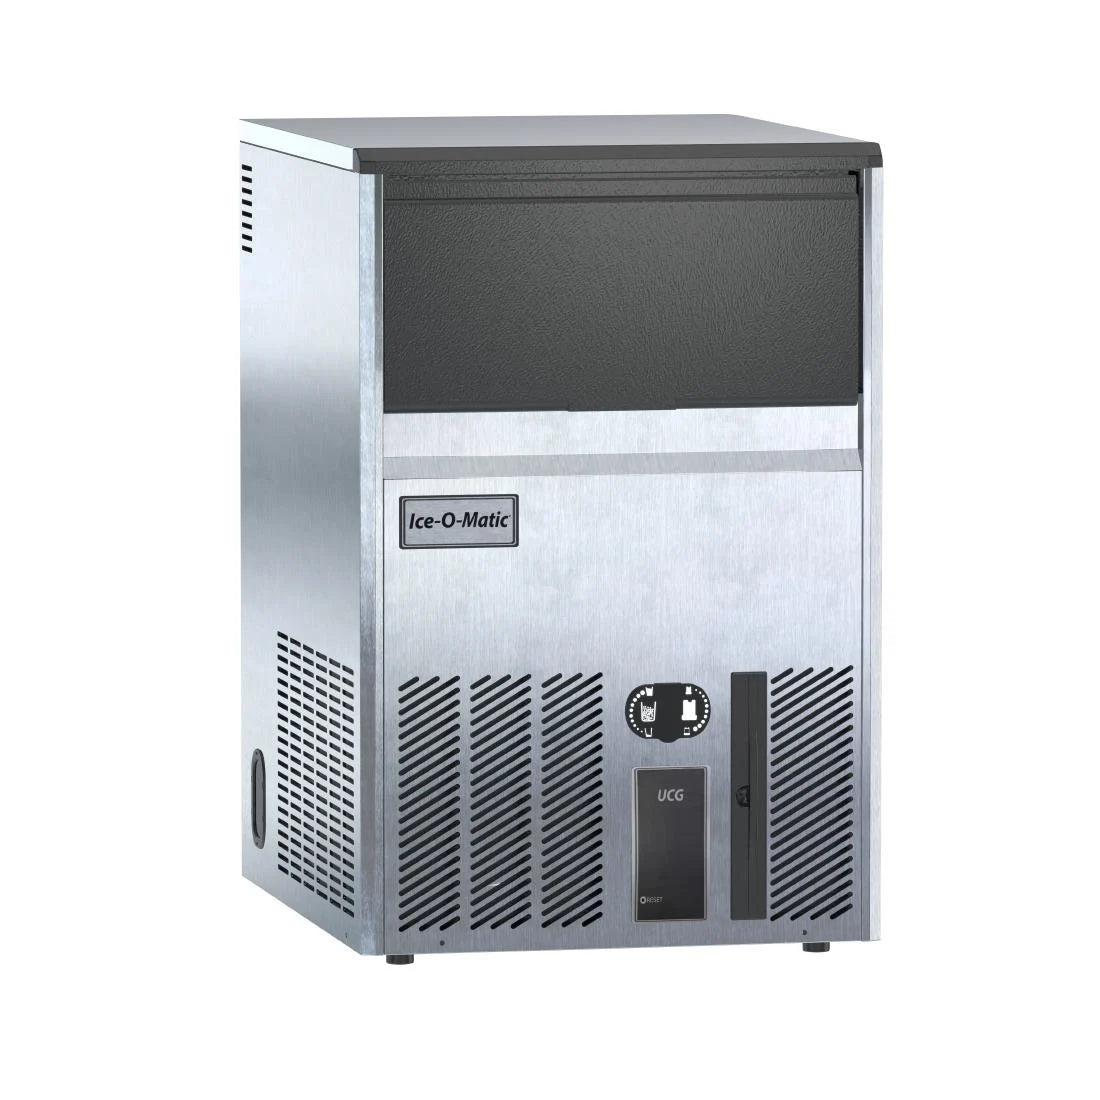 Ice-O-Matic Bistro Cube Ice Machine UCG065A.Product Ref:00545.MODEL:UCG065A.🚚 4-6 Days Delivery